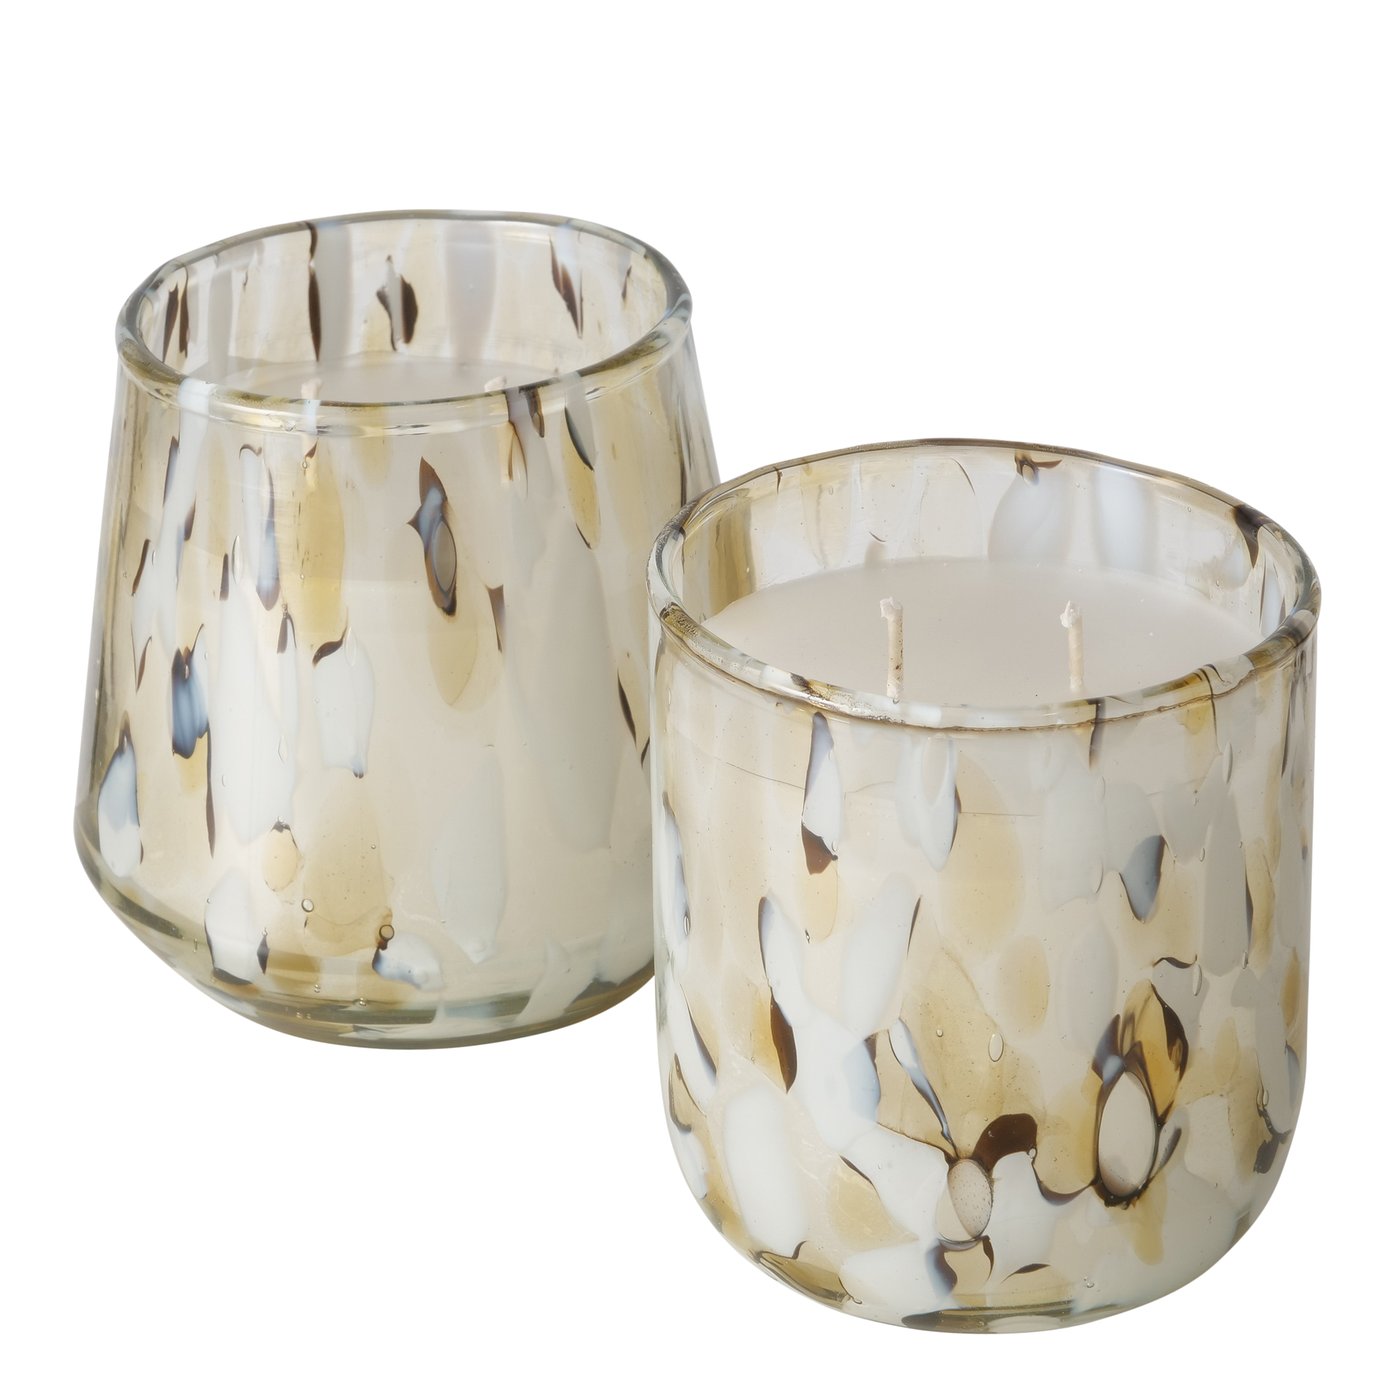 &Quirky Tortoiseshell Effect Glass Candle Pot : Round or Tumbler